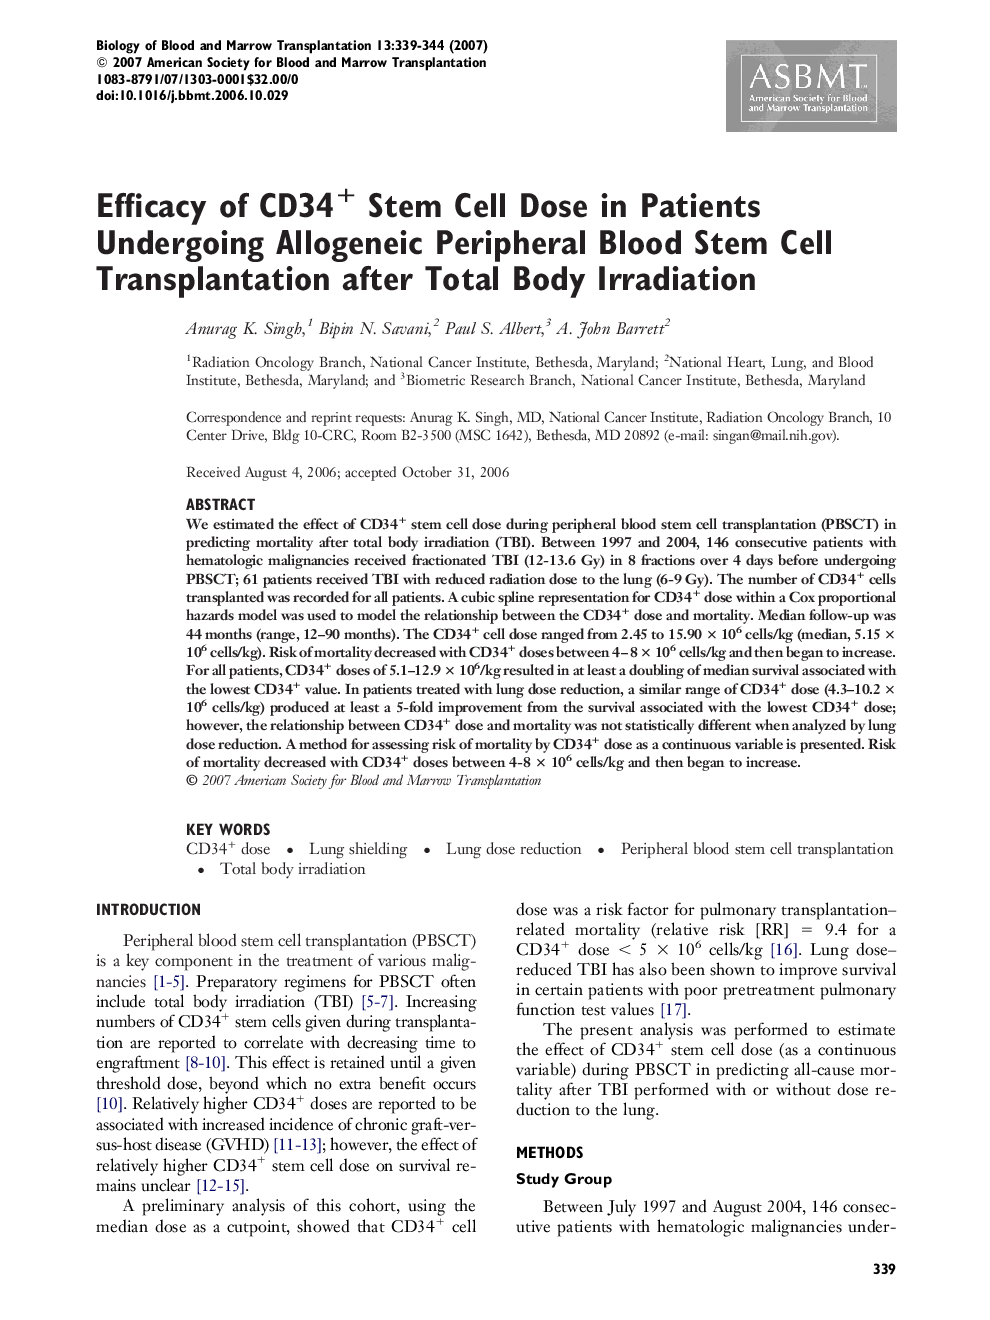 Efficacy of CD34+ Stem Cell Dose in Patients Undergoing Allogeneic Peripheral Blood Stem Cell Transplantation after Total Body Irradiation